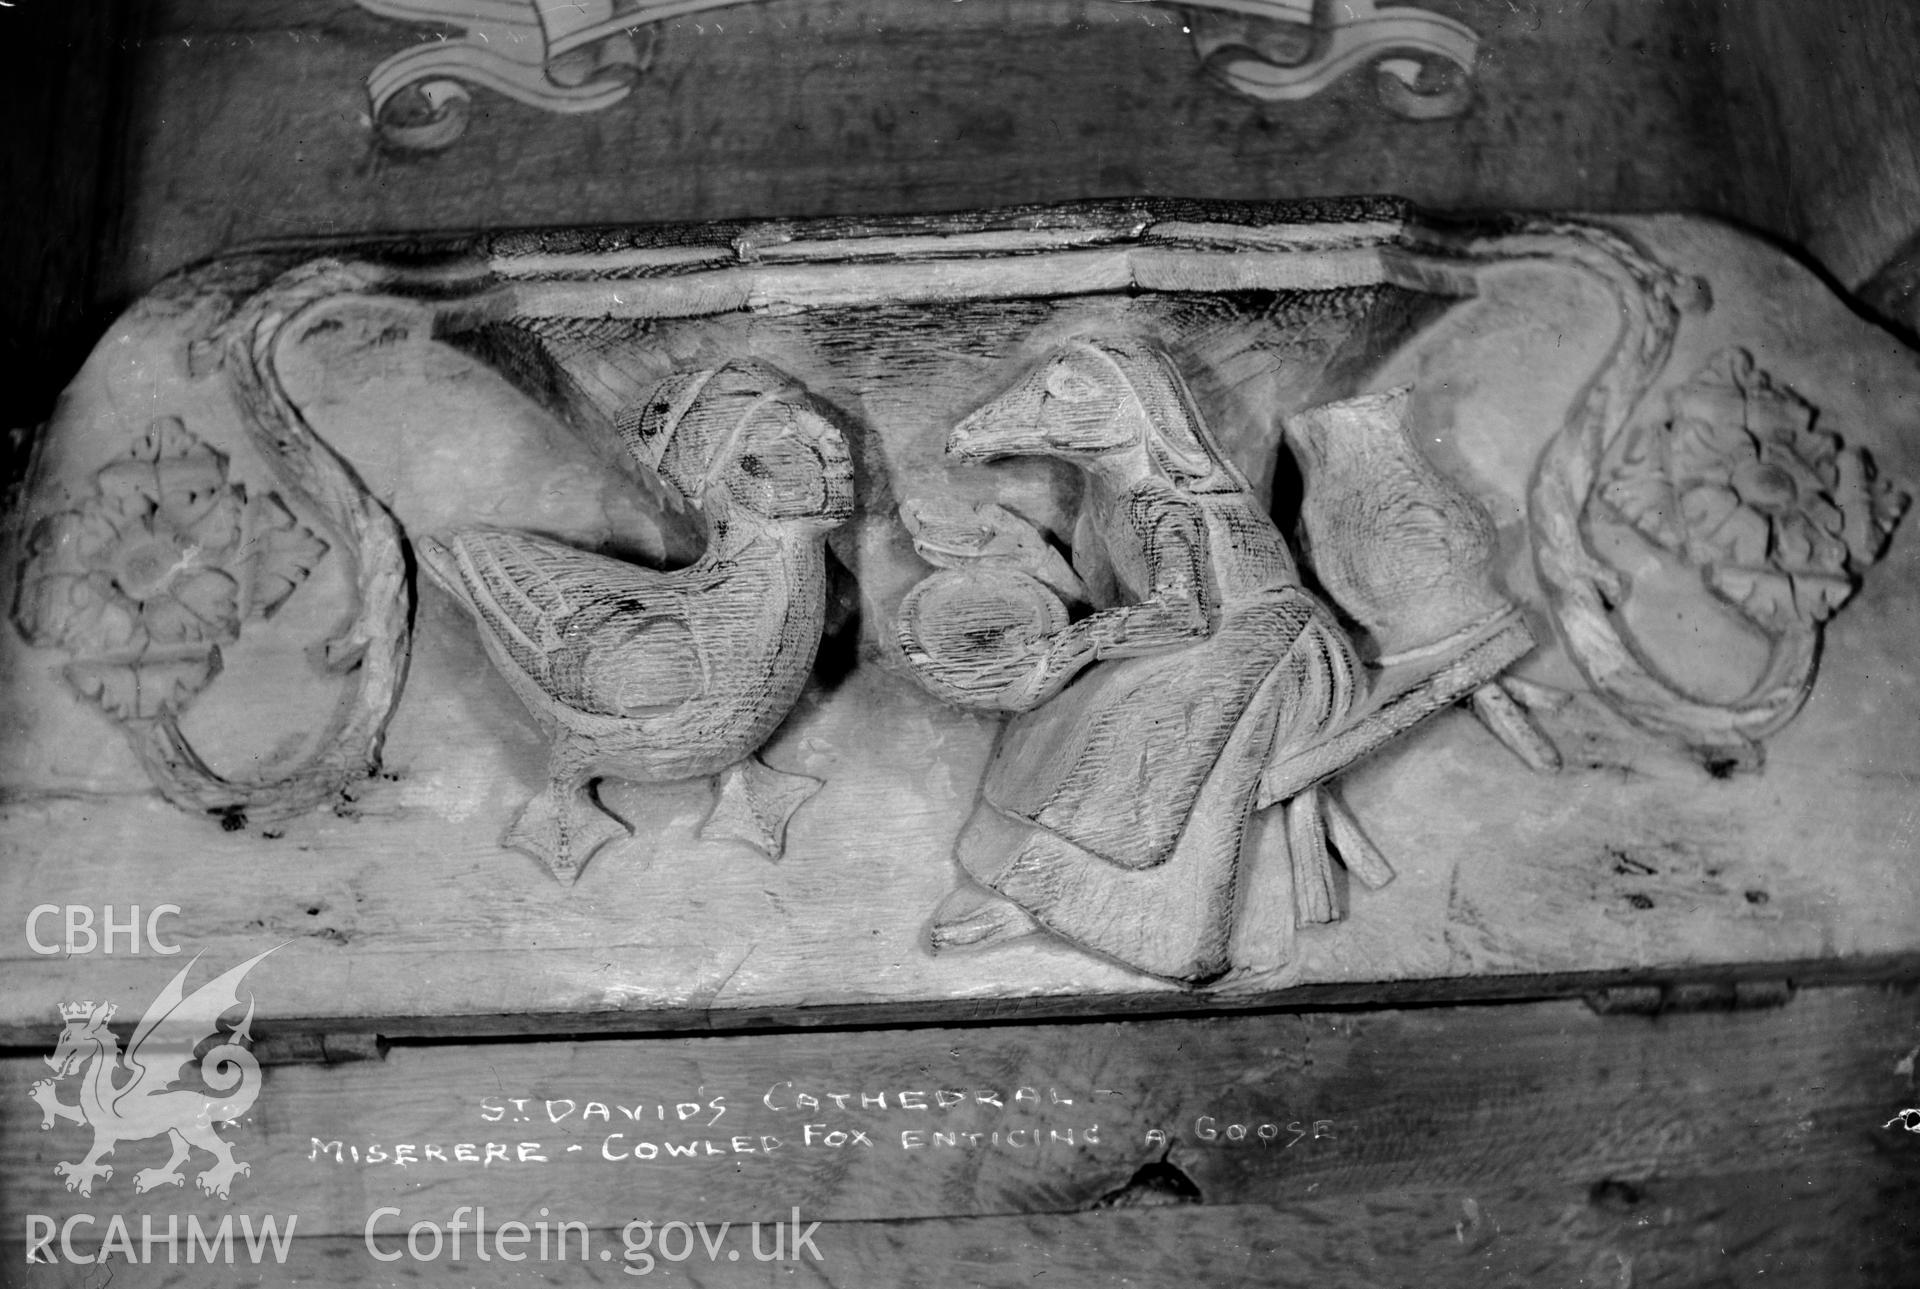 Detail of miserere at St Davids Cathedral showing carving of cowled animal enticing a goose.